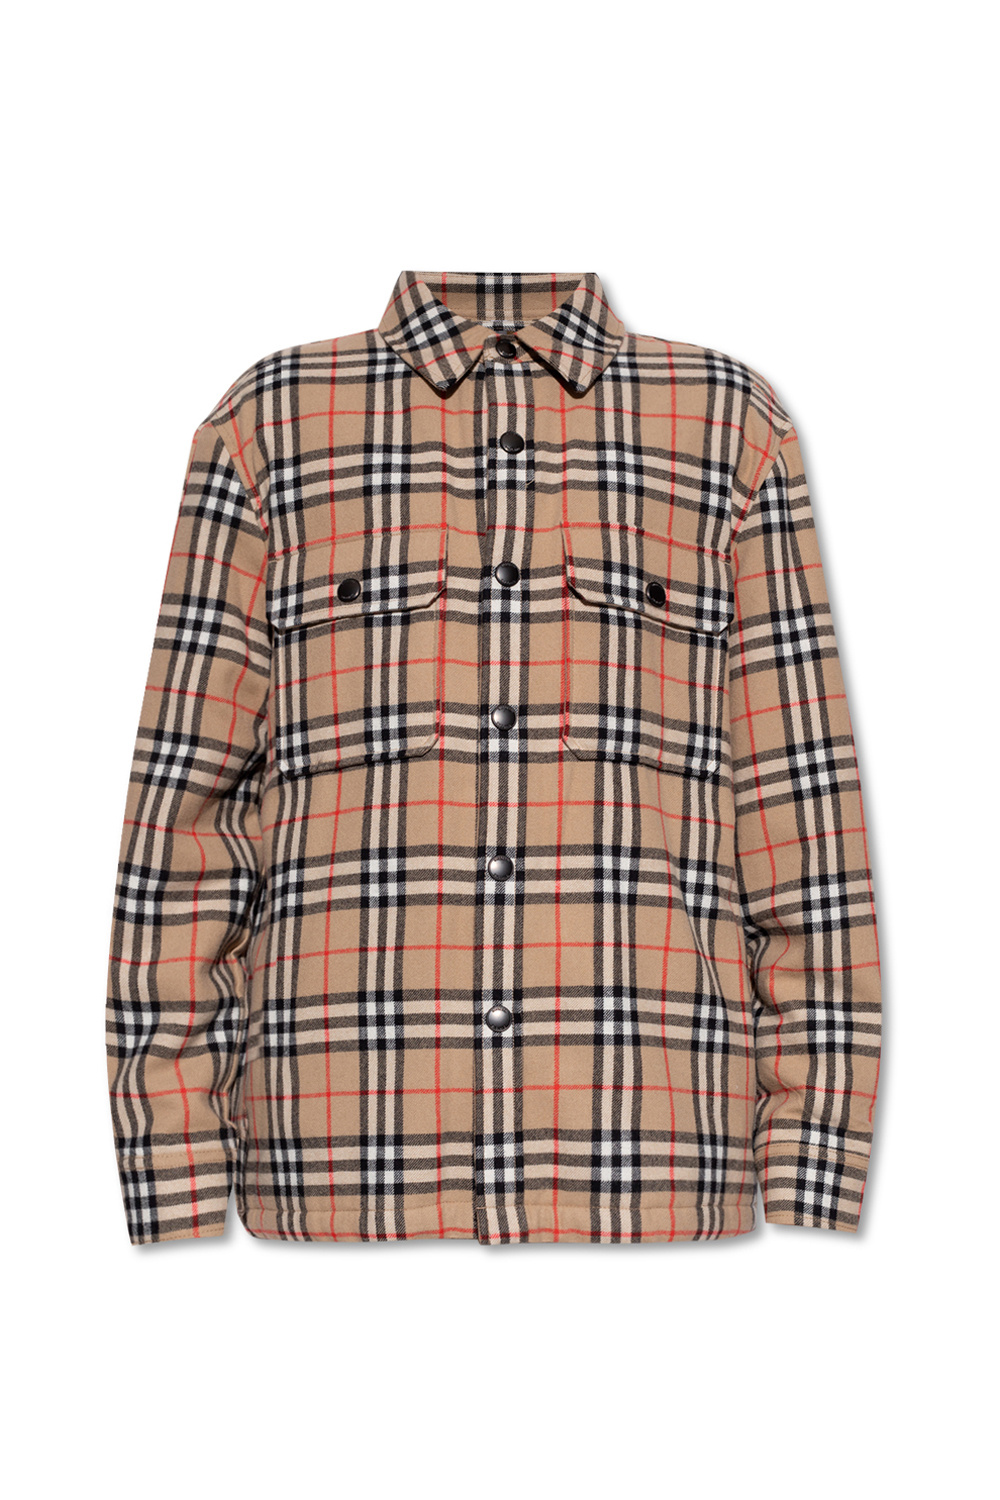 Burberry Check Wool Blend Shirt Jacket in Multicoloured - Burberry